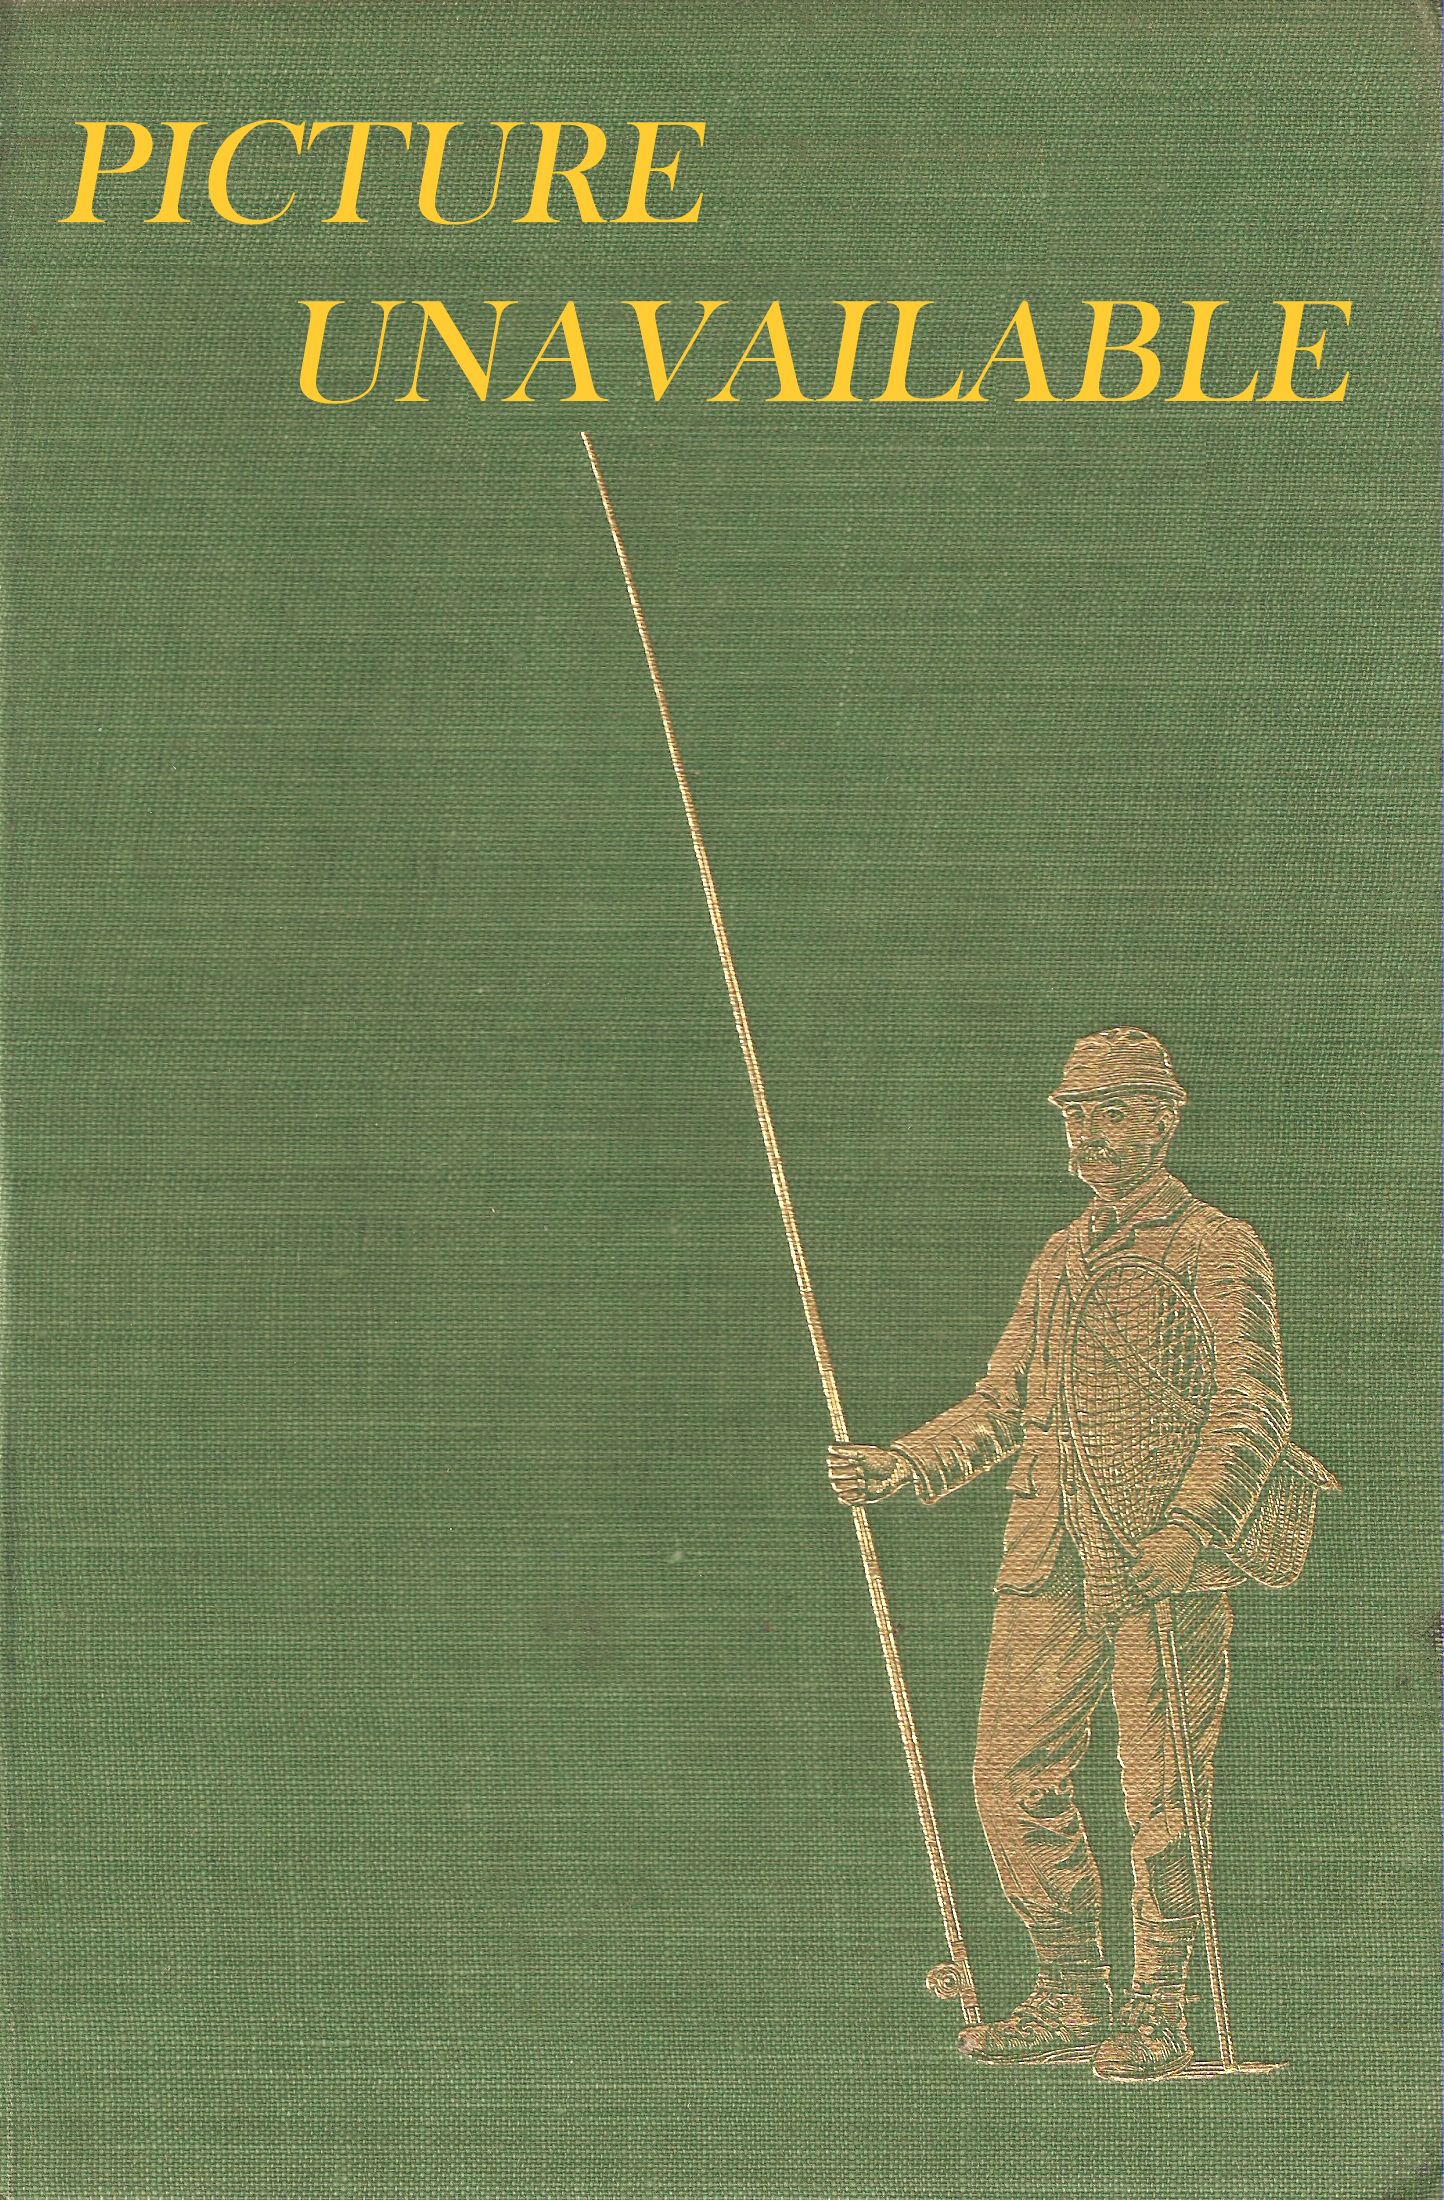 EVERYBODY'S BOOK ON ANGLING. By F.H. Amphlett.